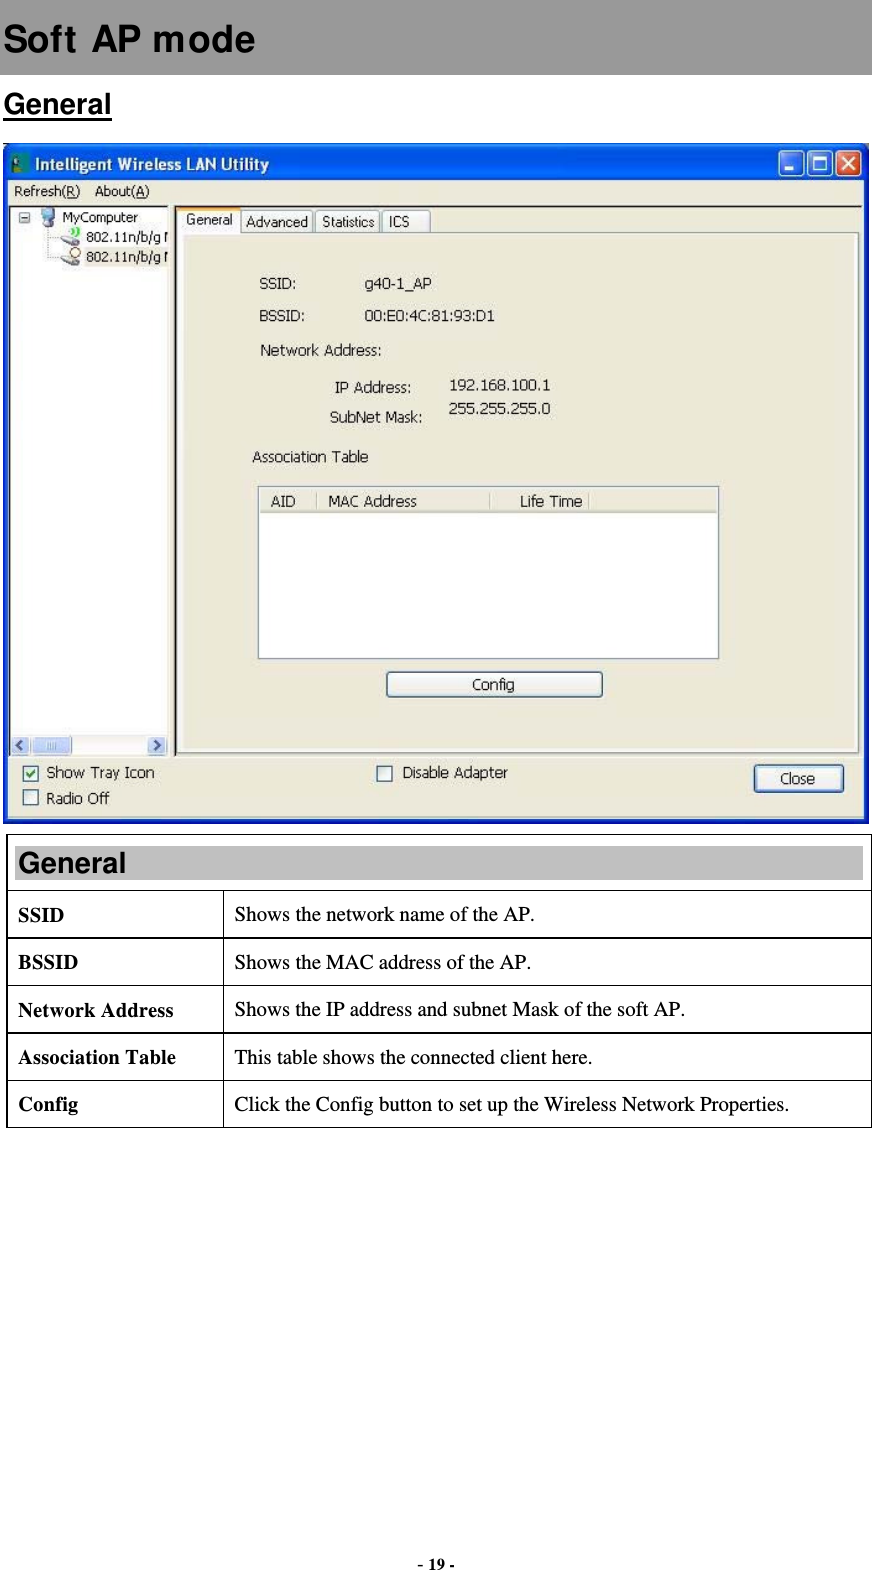  - 19 - Soft AP mode General  General SSID   Shows the network name of the AP. BSSID  Shows the MAC address of the AP. Network Address  Shows the IP address and subnet Mask of the soft AP. Association Table  This table shows the connected client here. Config  Click the Config button to set up the Wireless Network Properties. 